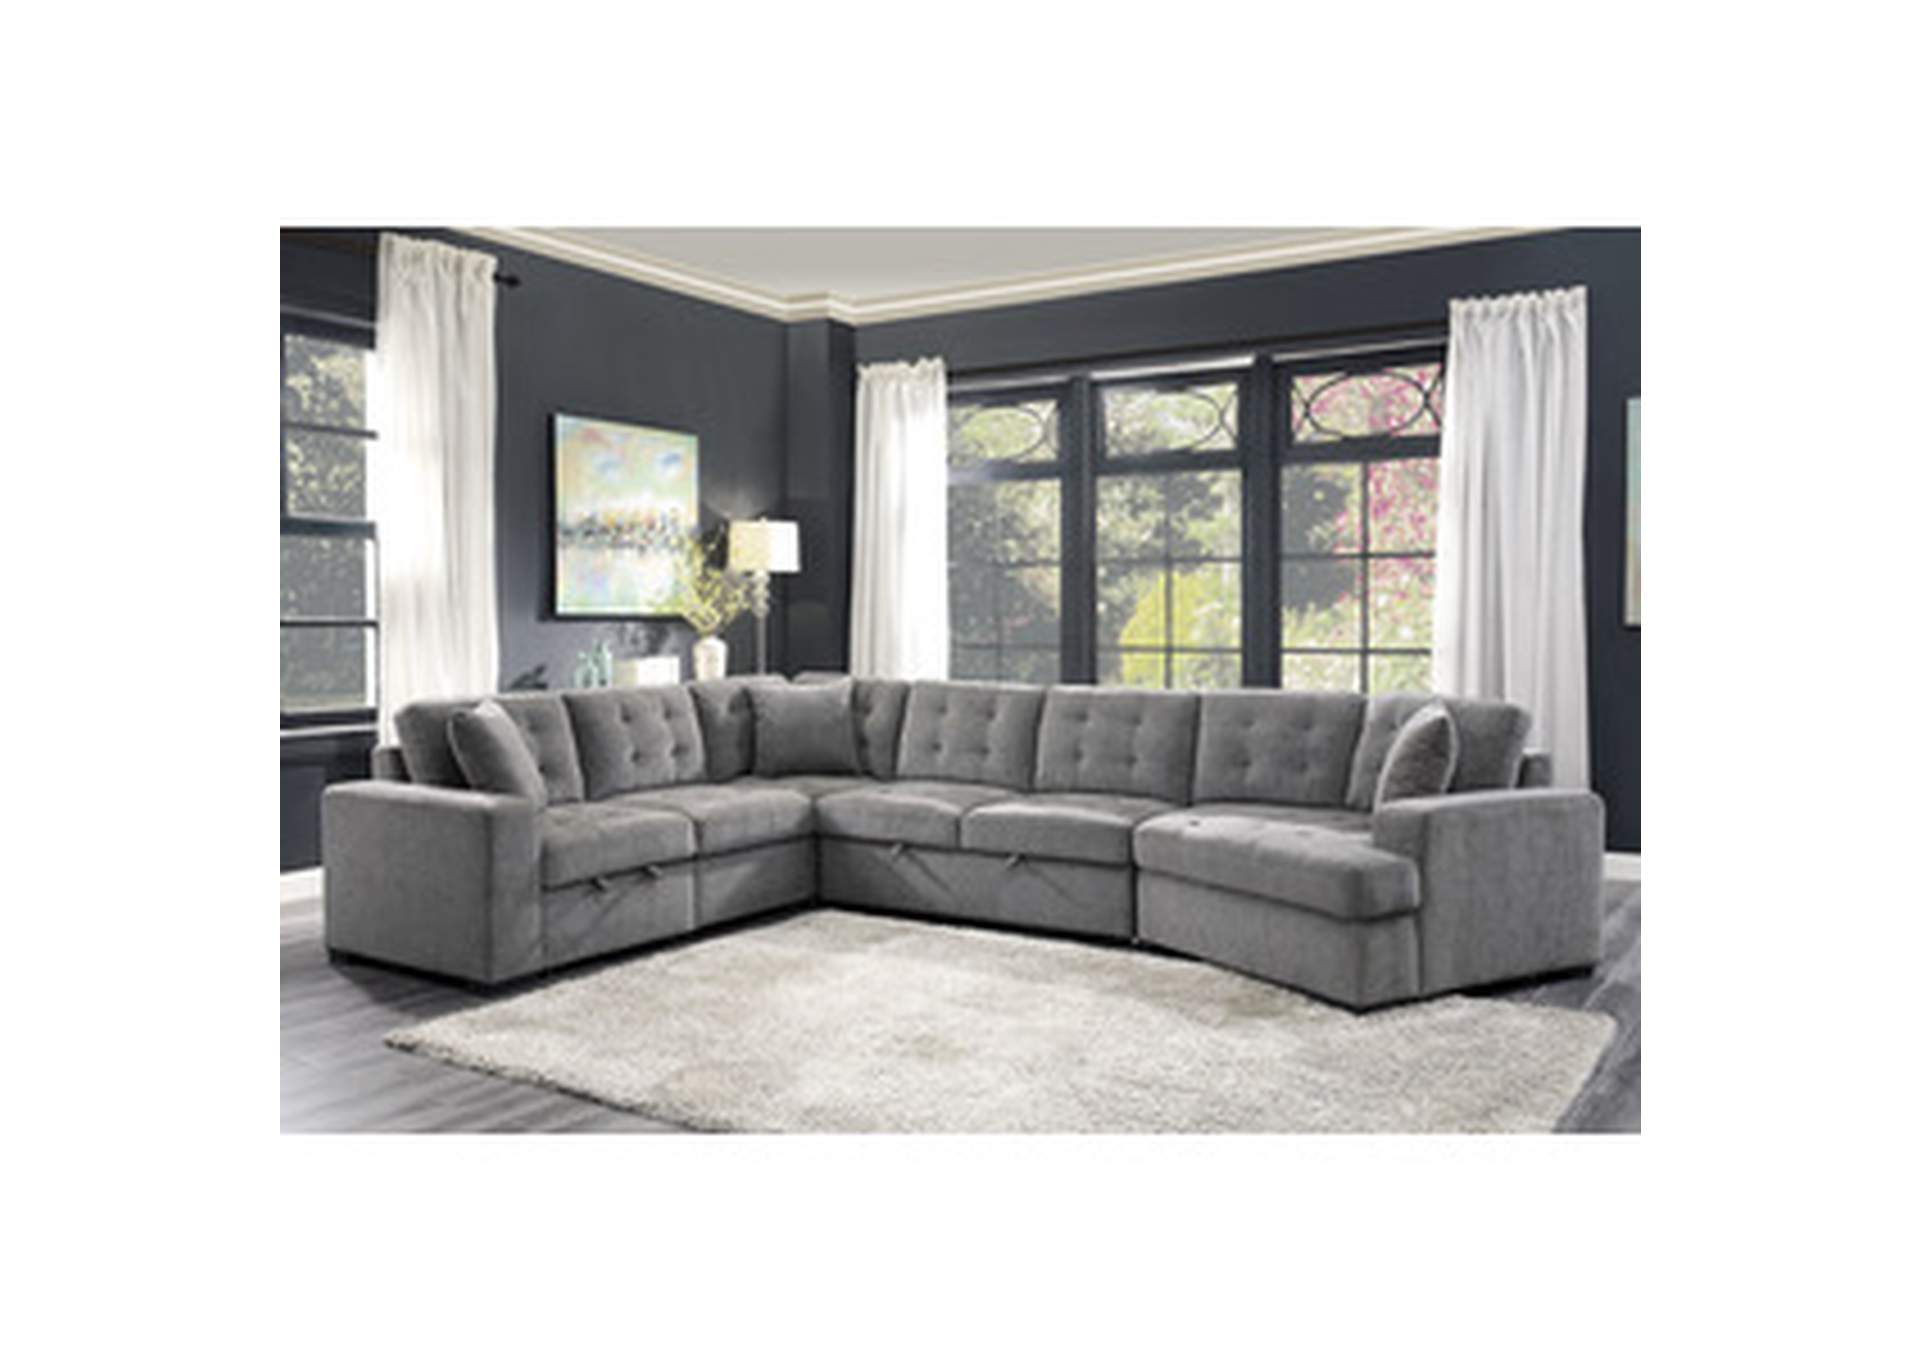 Logansport Left Side 2-Seater With Pull-Out Ottoman And 1 Pillow,Homelegance